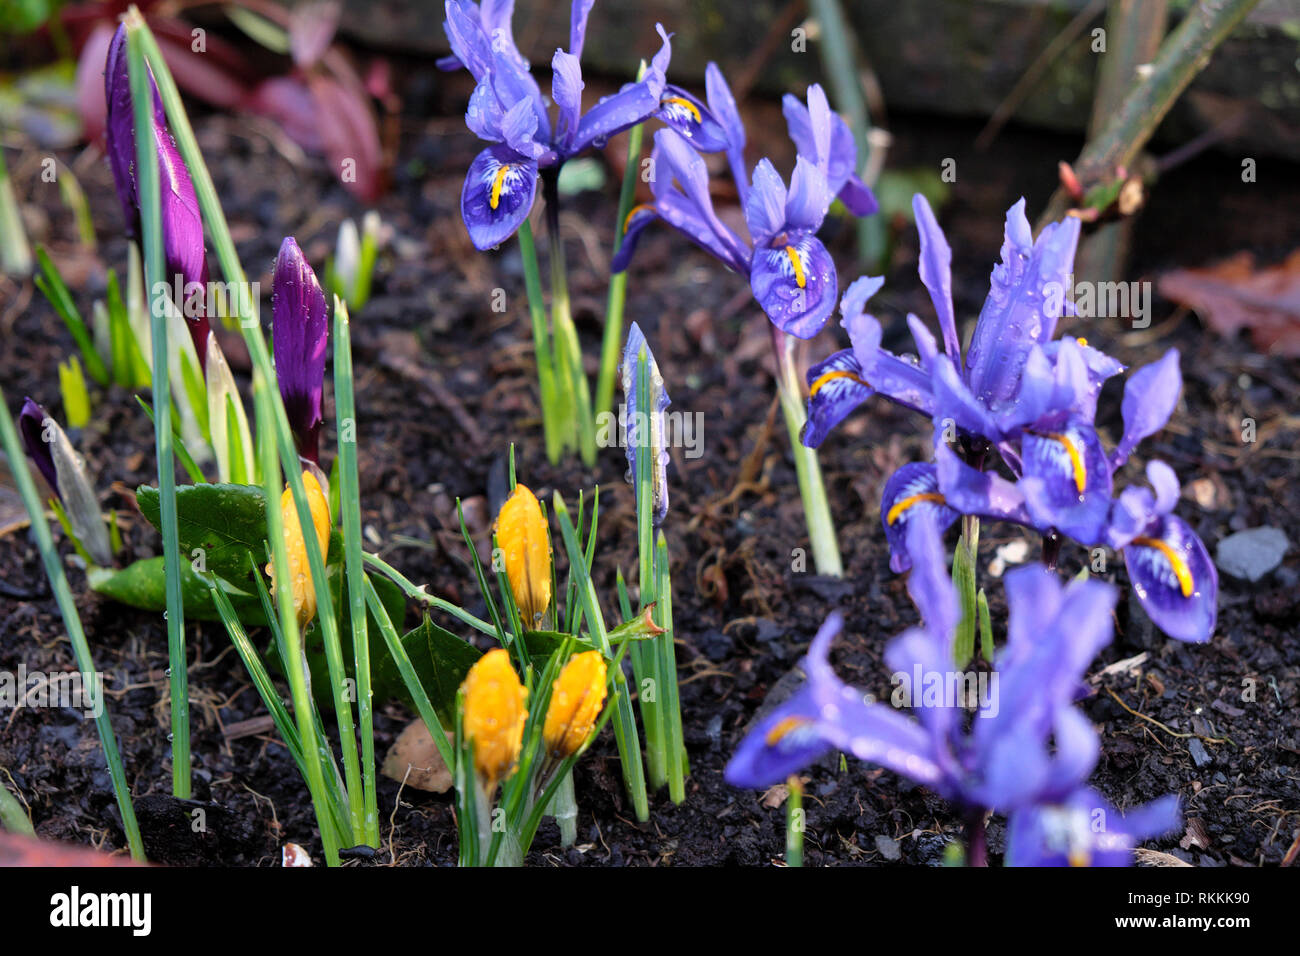 Spring bulbs iris reticulata in bloom with yellow crocus flowers growing in  a large planter container in a garden in February Wales UK KATHY DEWITT  Stock Photo - Alamy